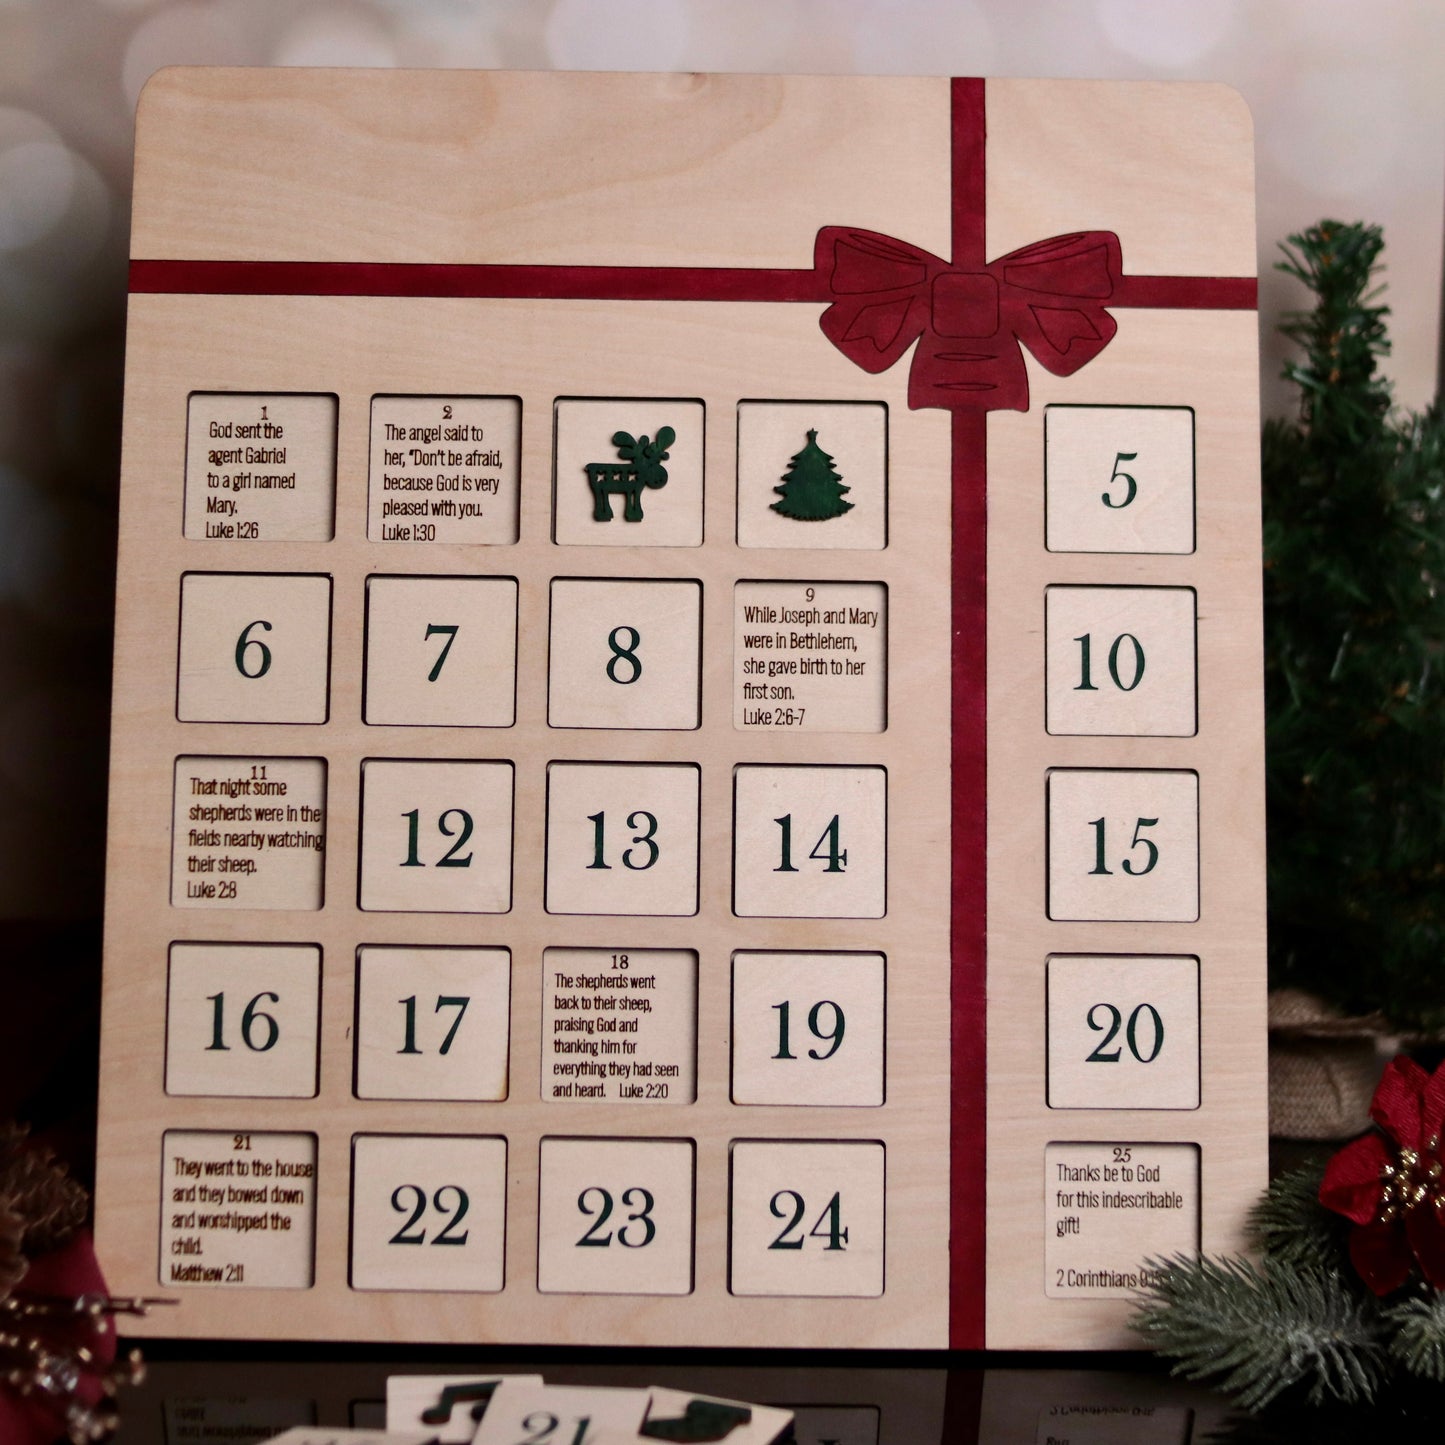 Advent Calendar for Children, Bible Verse Countdown to Christmas, Religious Advent Calendar, Designed for Kids of All Ages